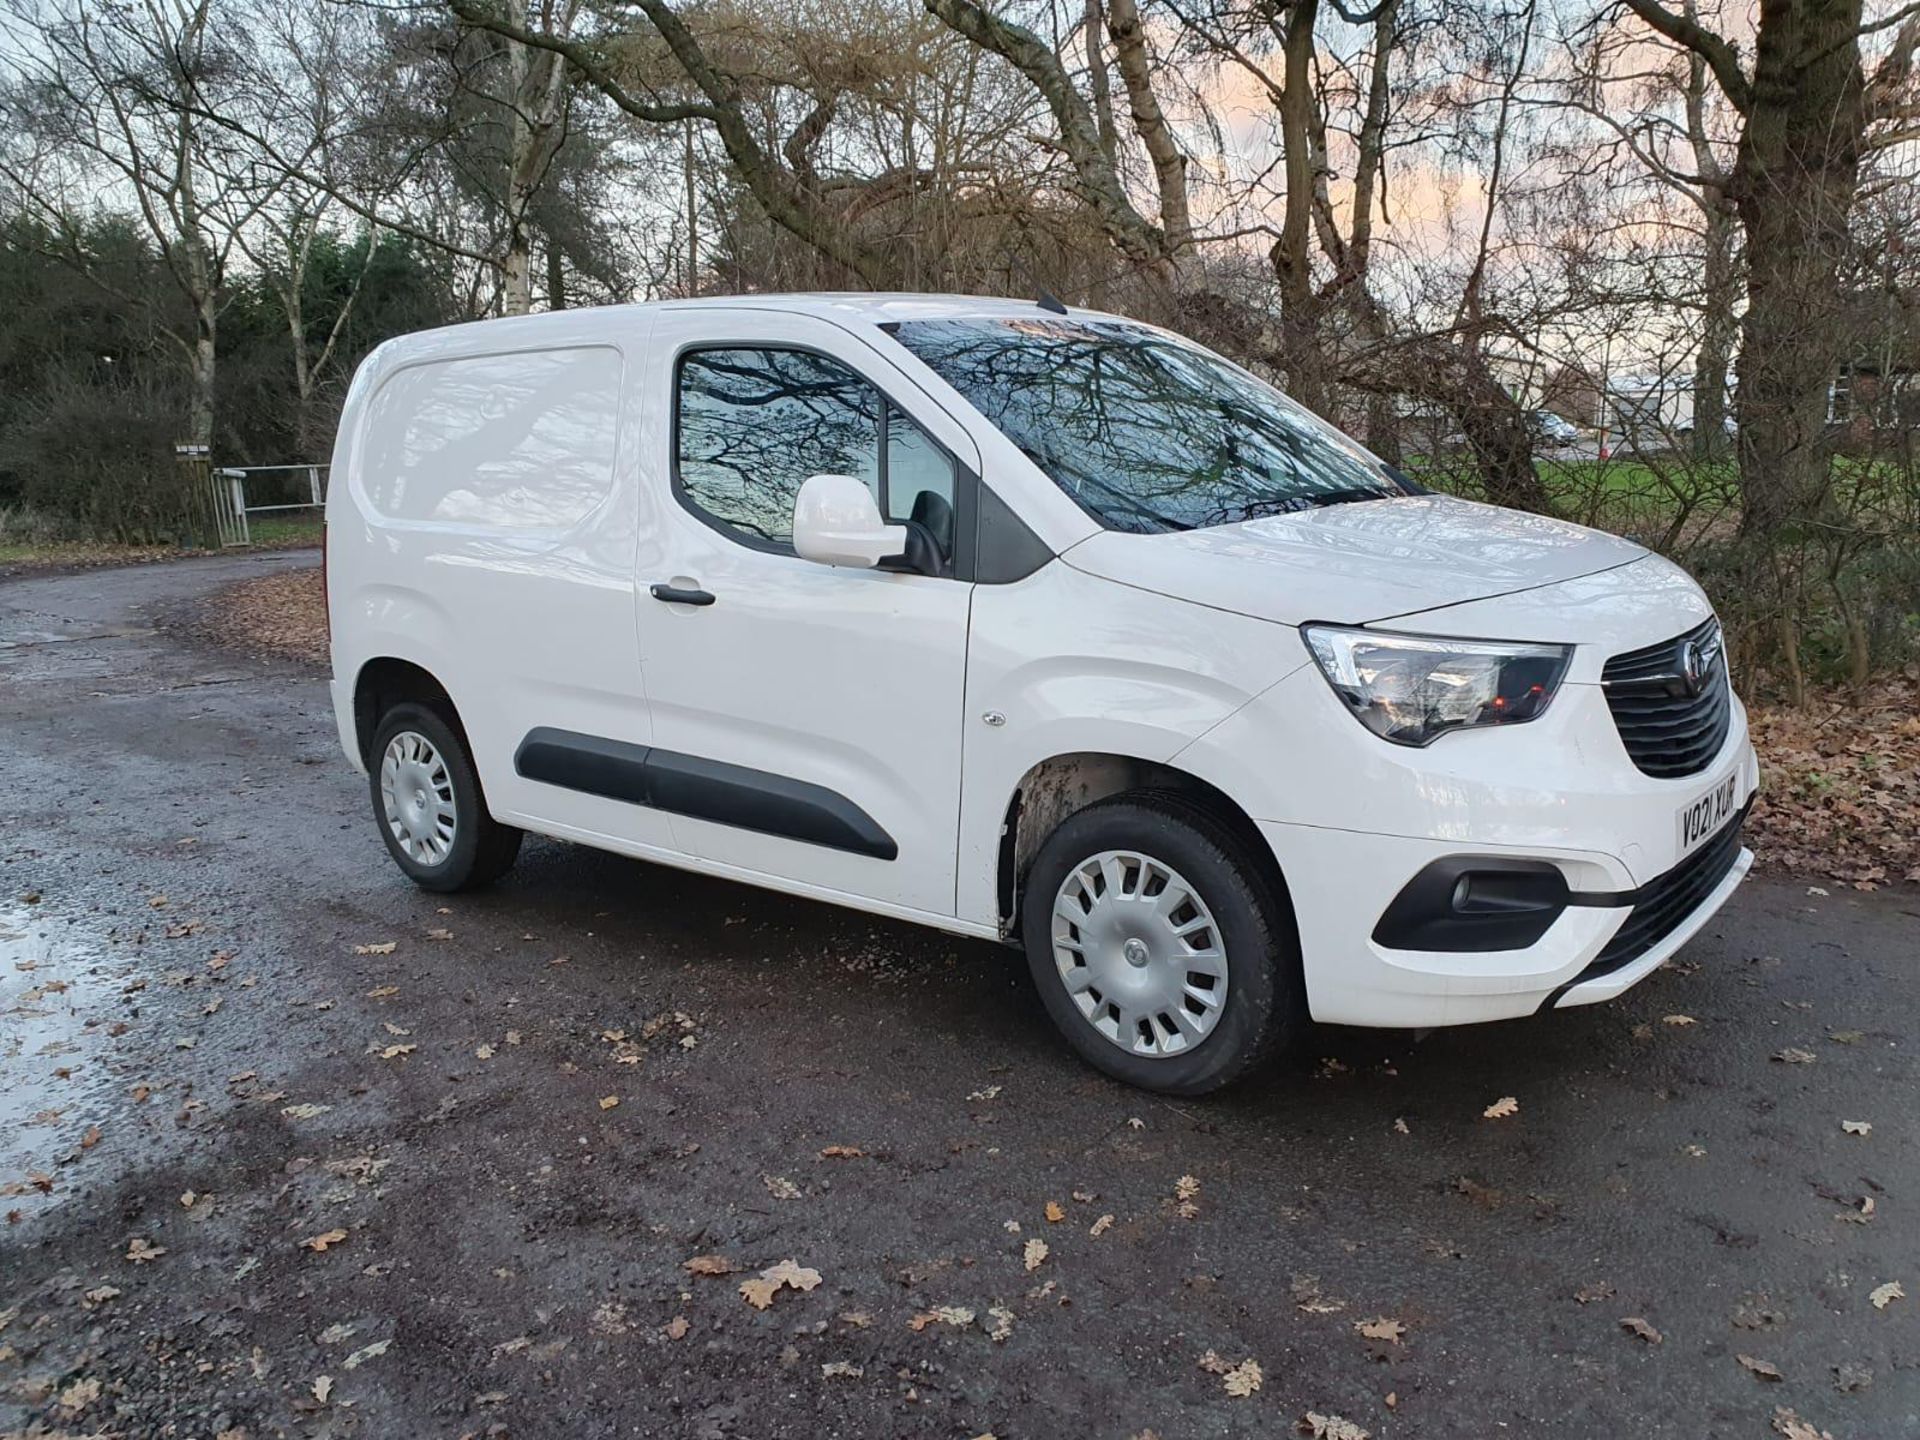 2021 21 Vauxhall combo sportive White panel van - 3 seats - air con - ply lined - 2 keys - VO21 XUR